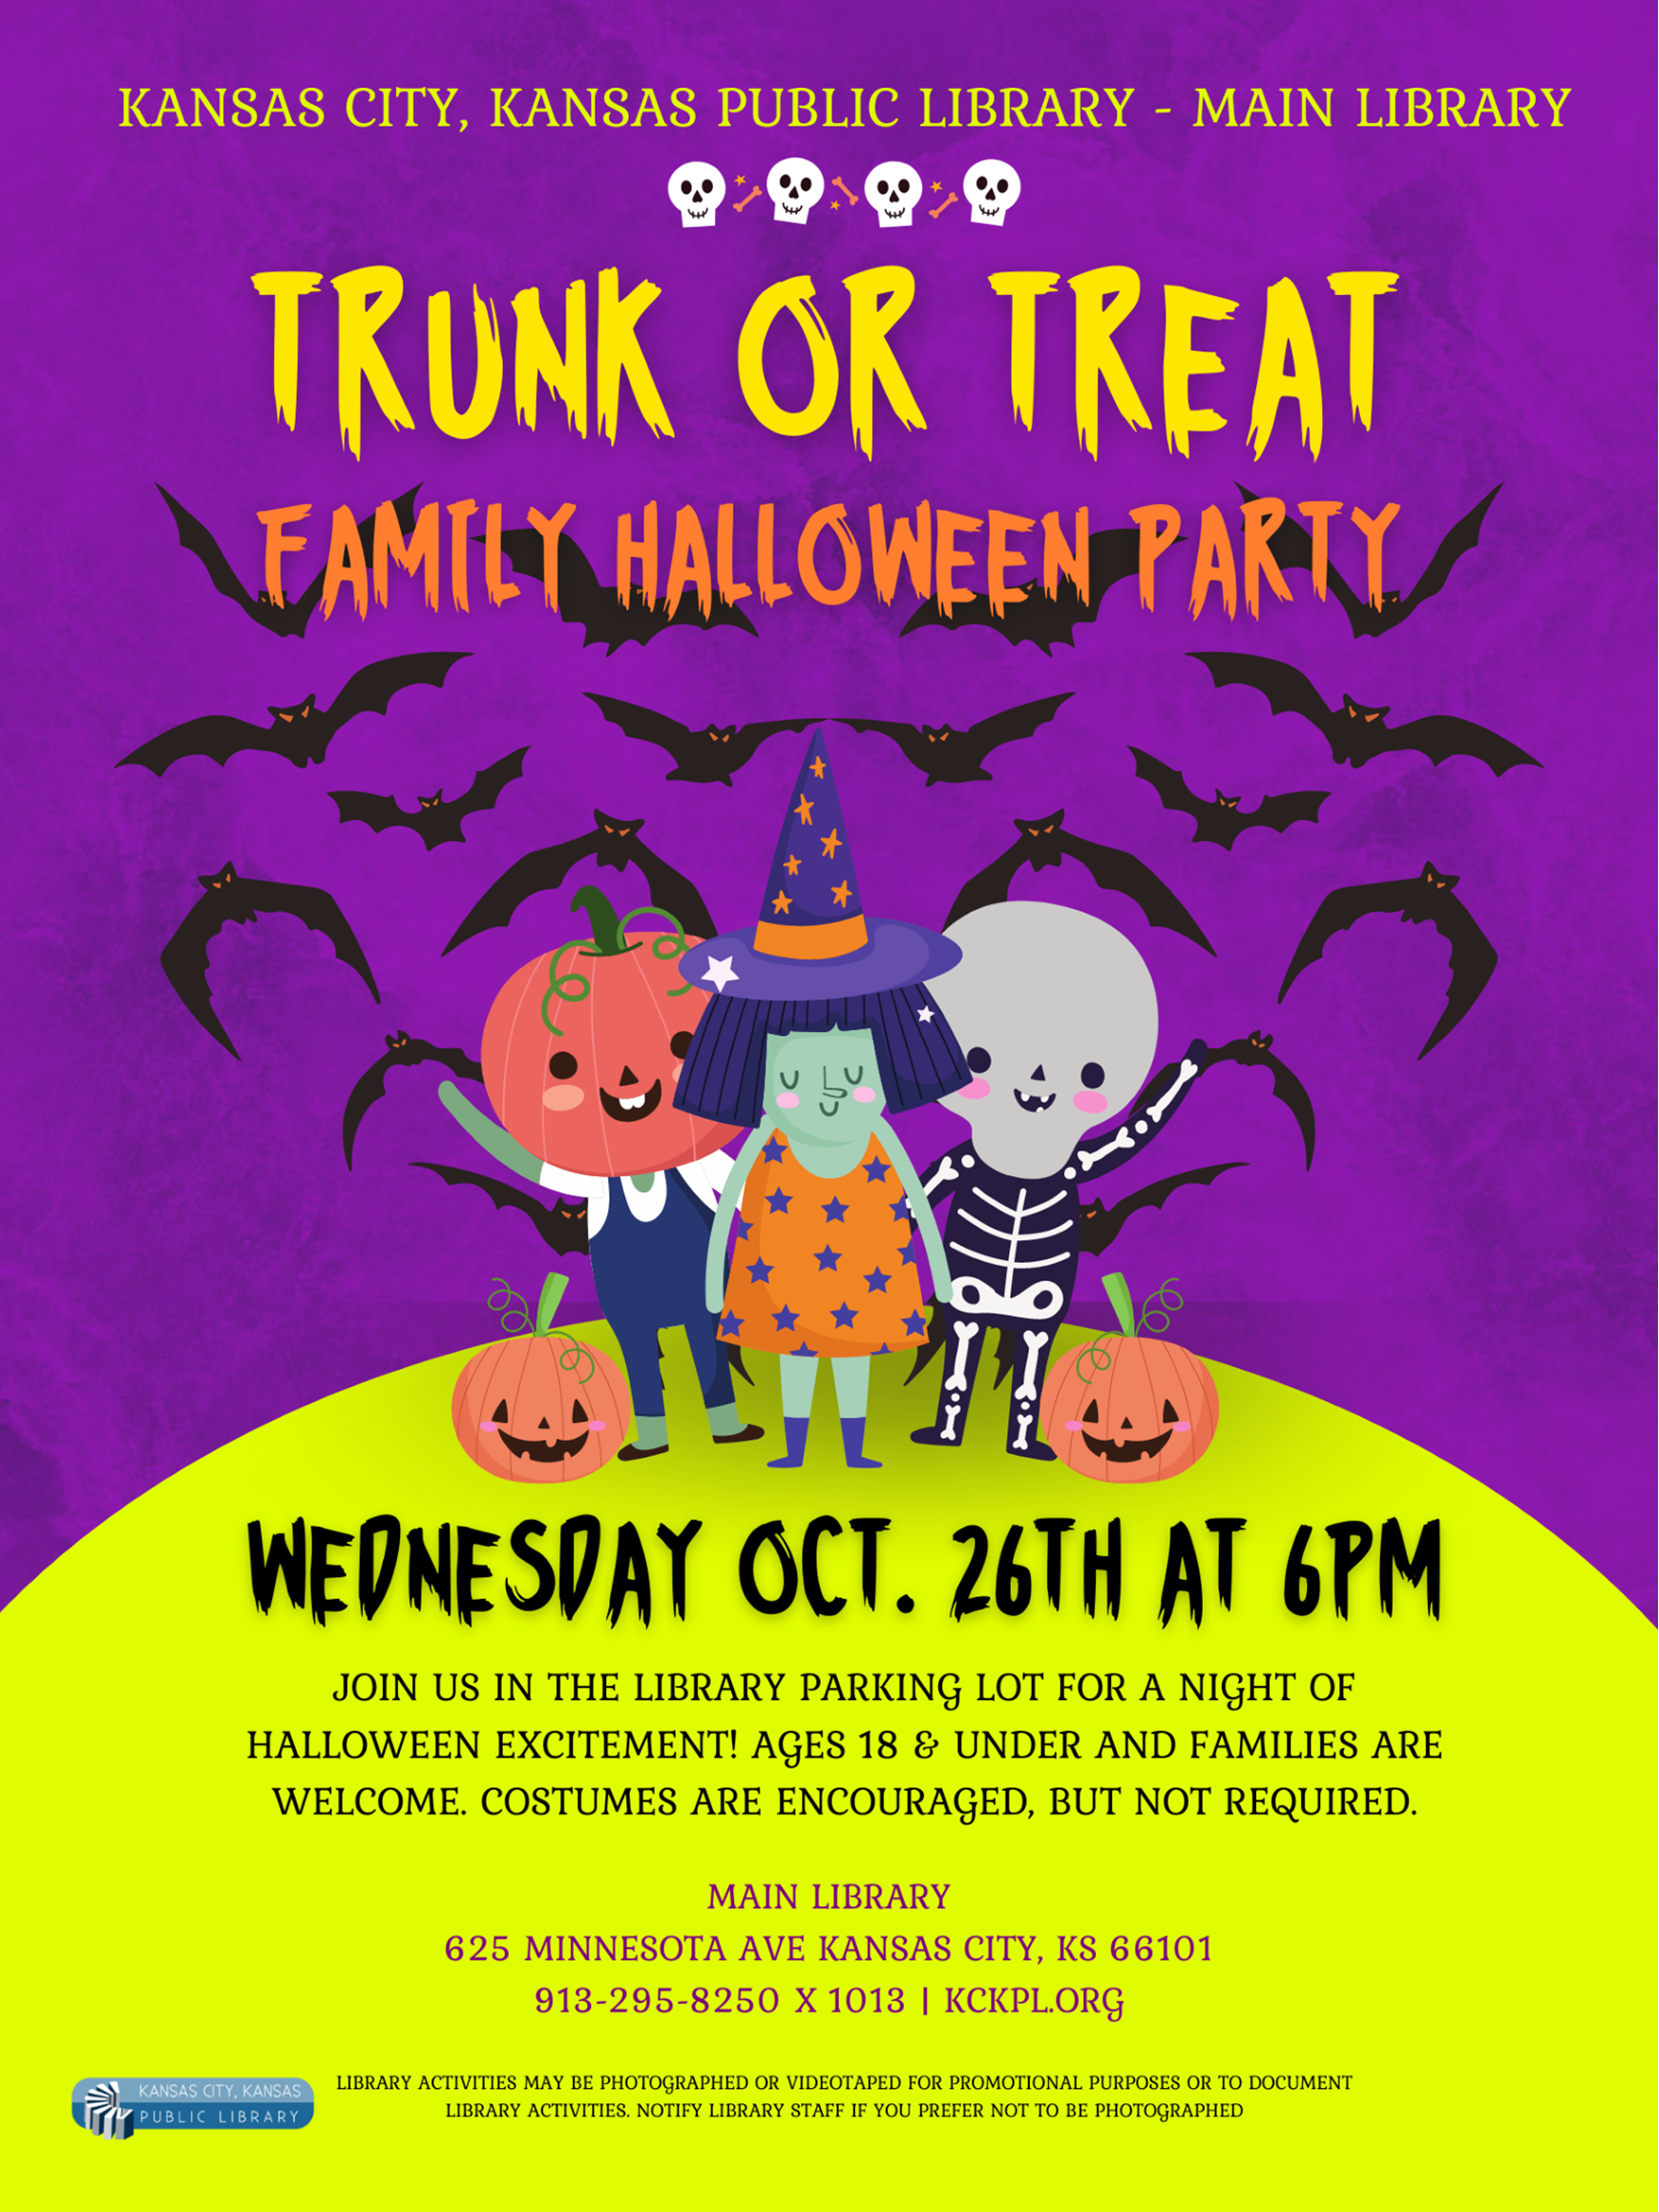 Trunk or Treat Family Halloween party.